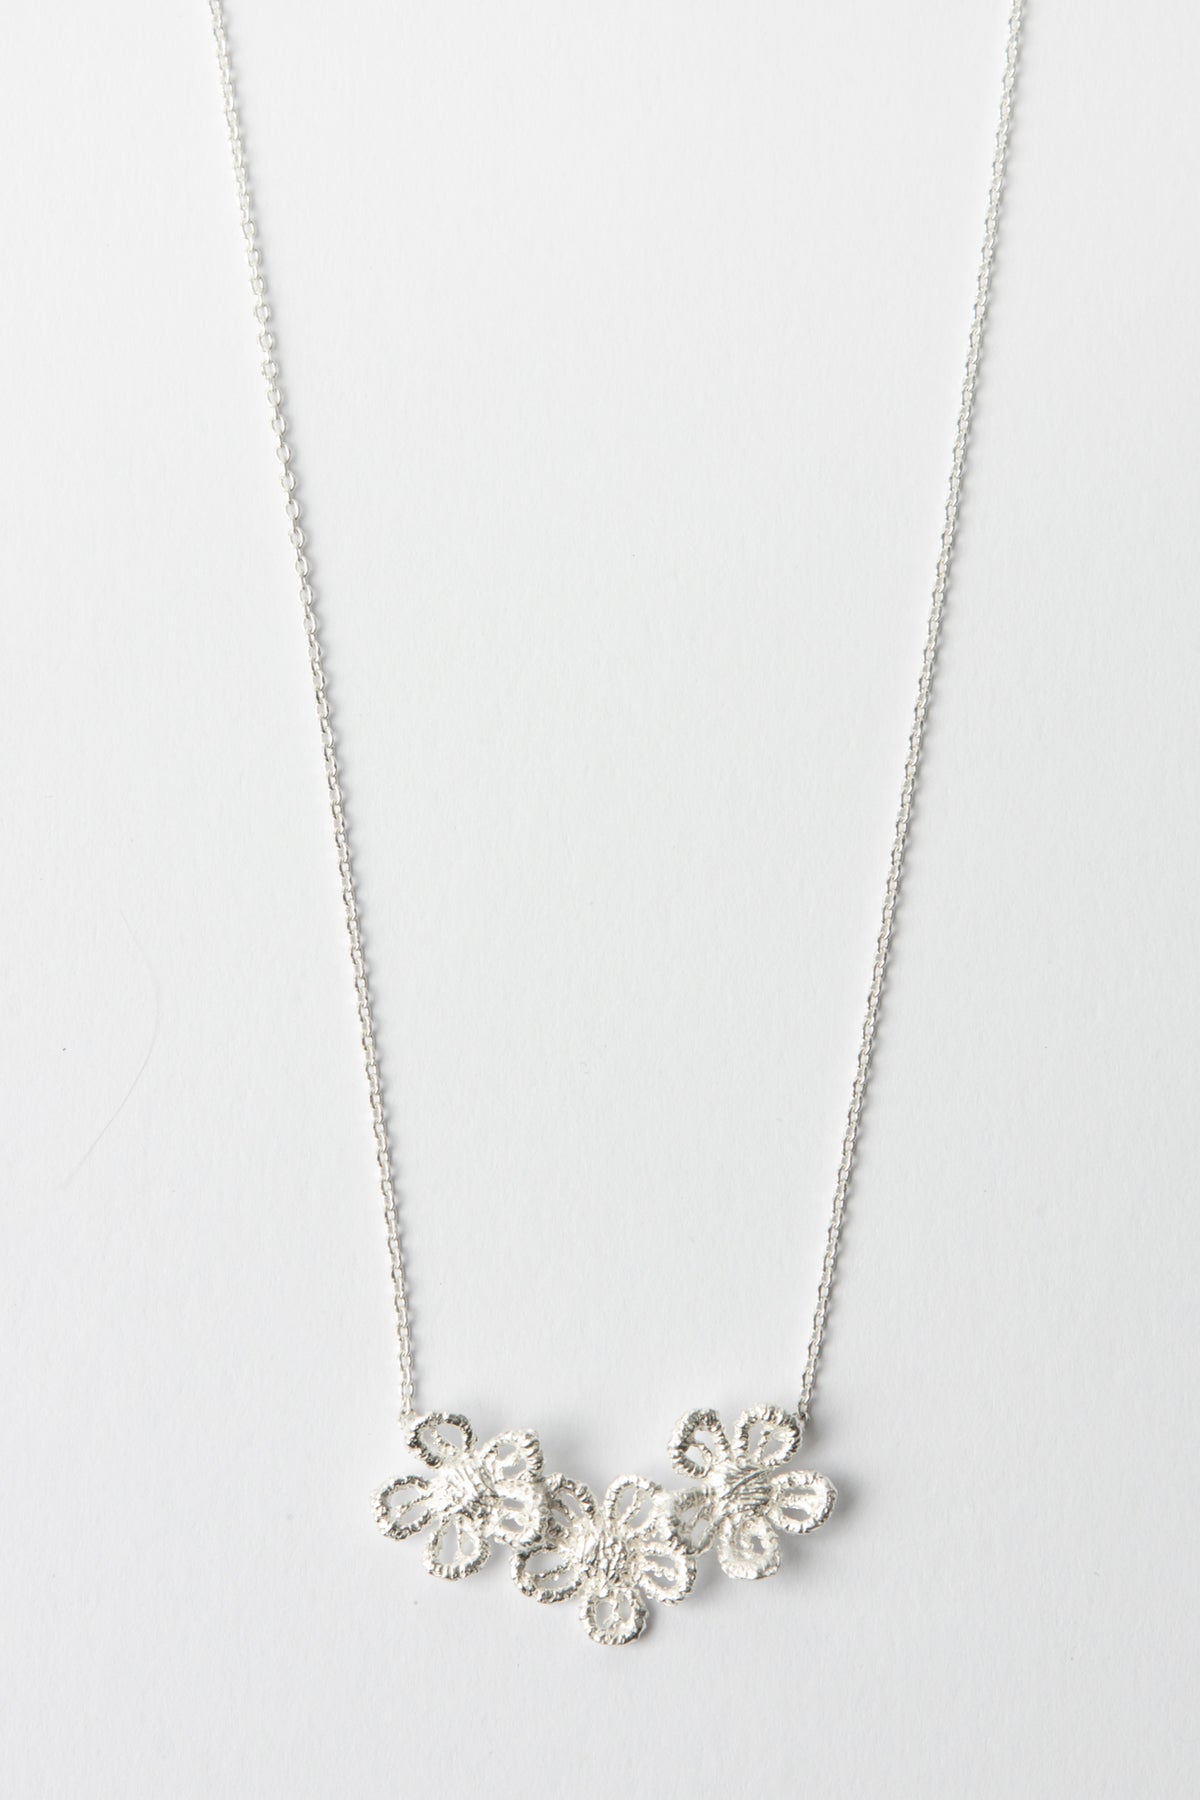 3 Silver Brushed Flowers Necklace